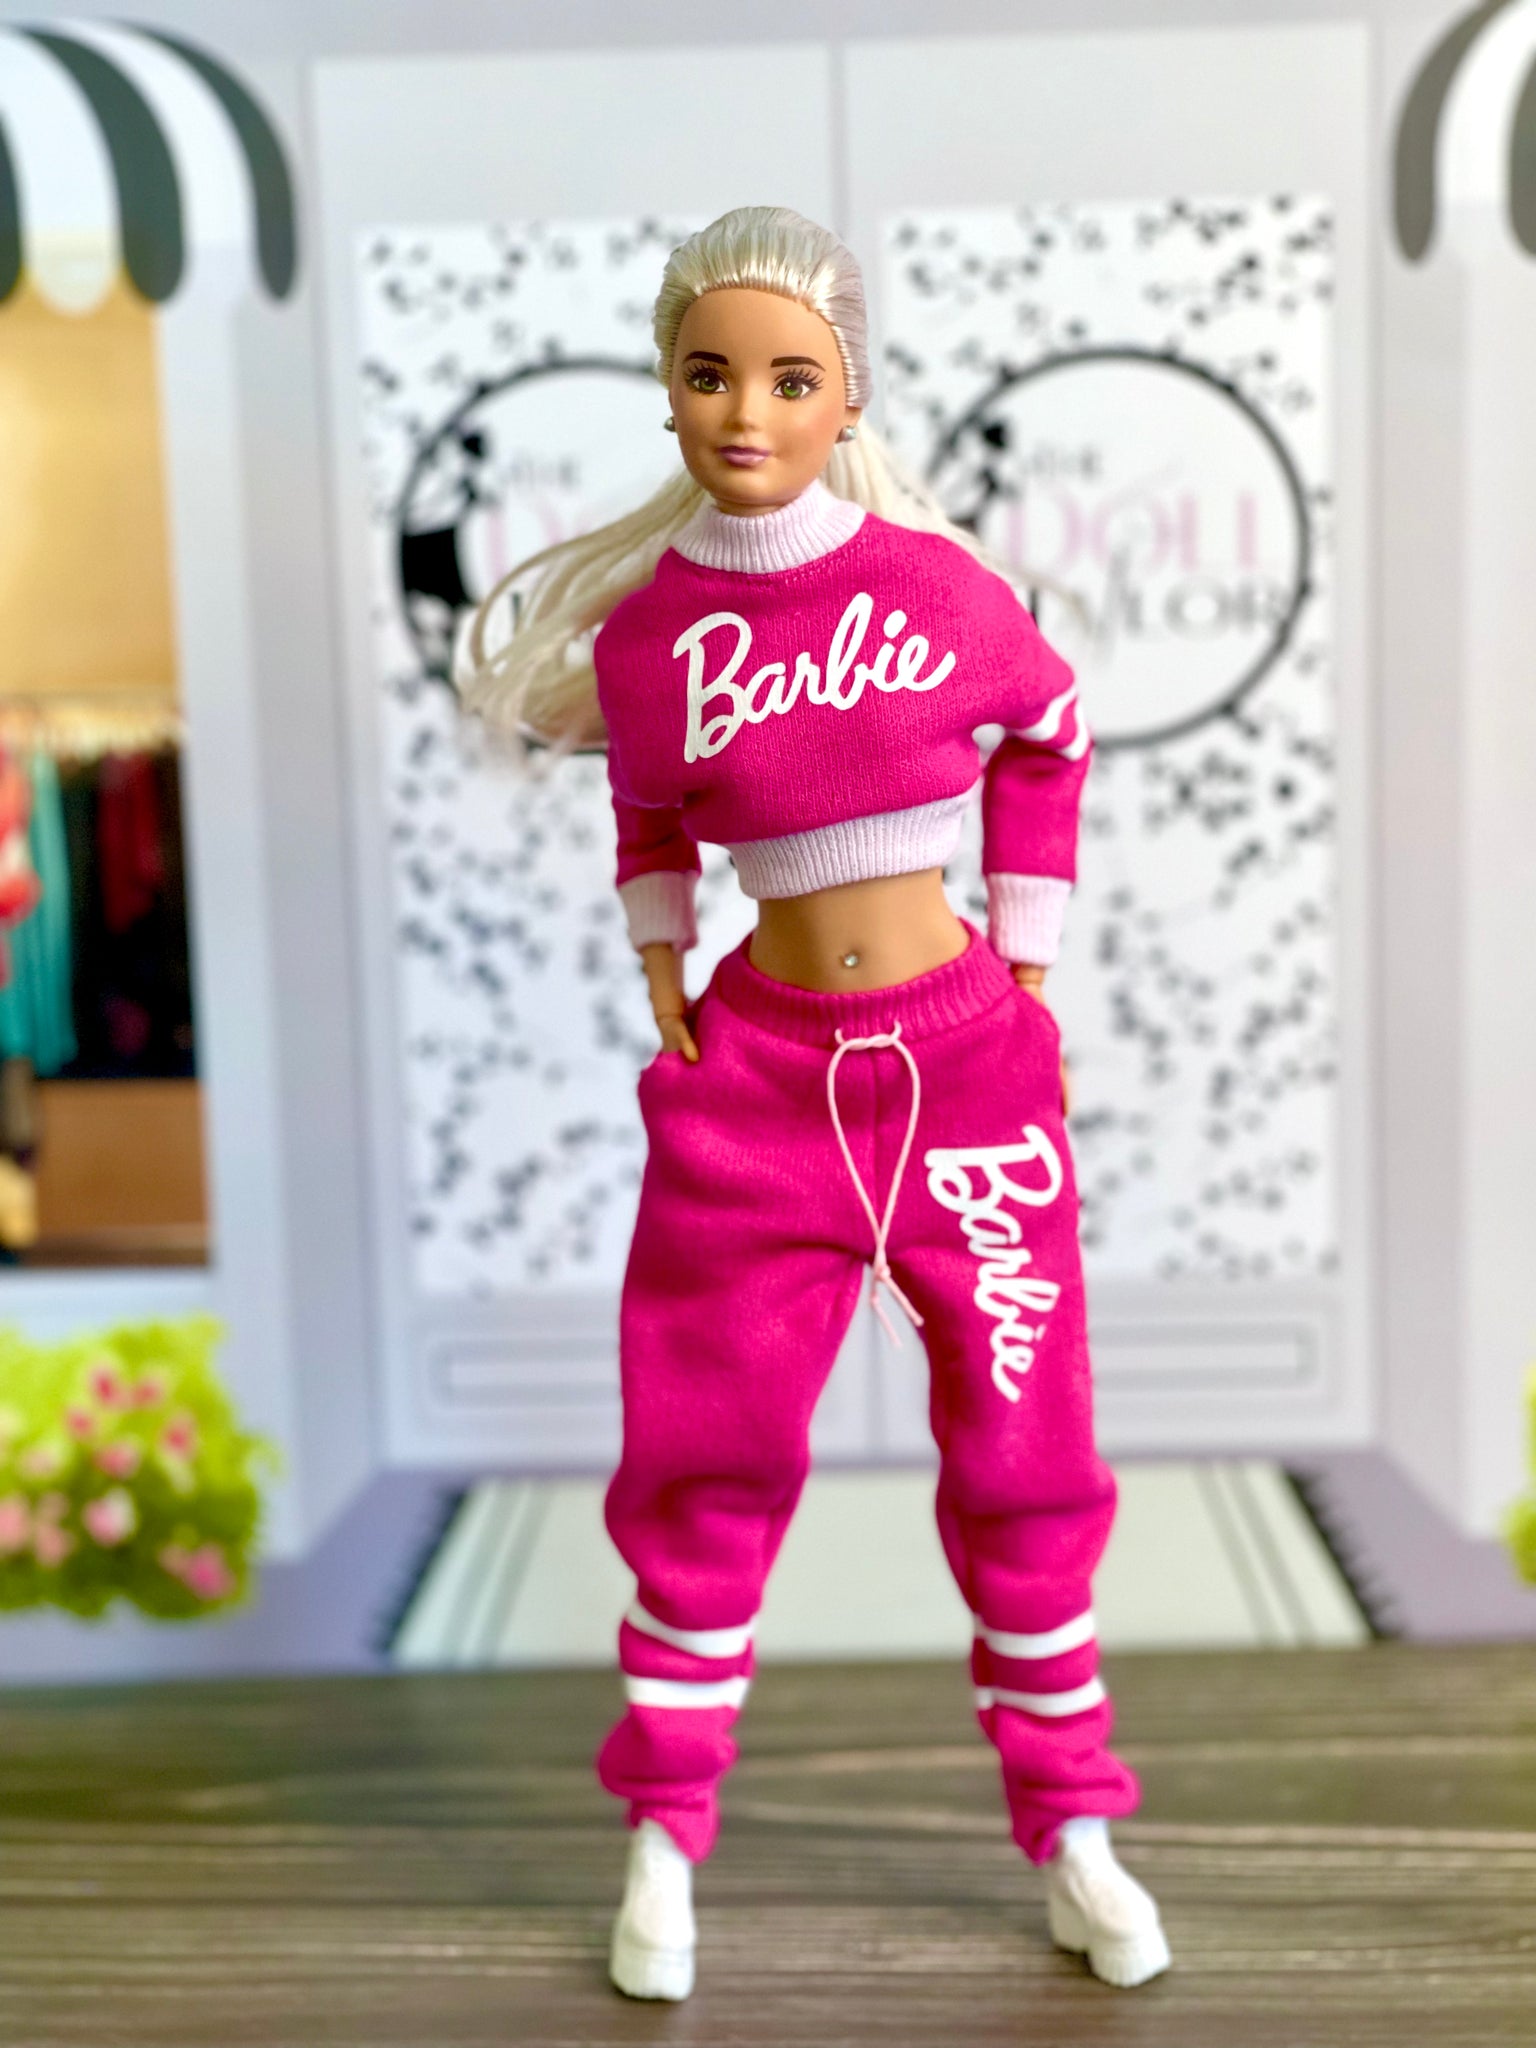 Pink sweatpants and sweatshirt for Barbie doll with logo – The Doll Tailor